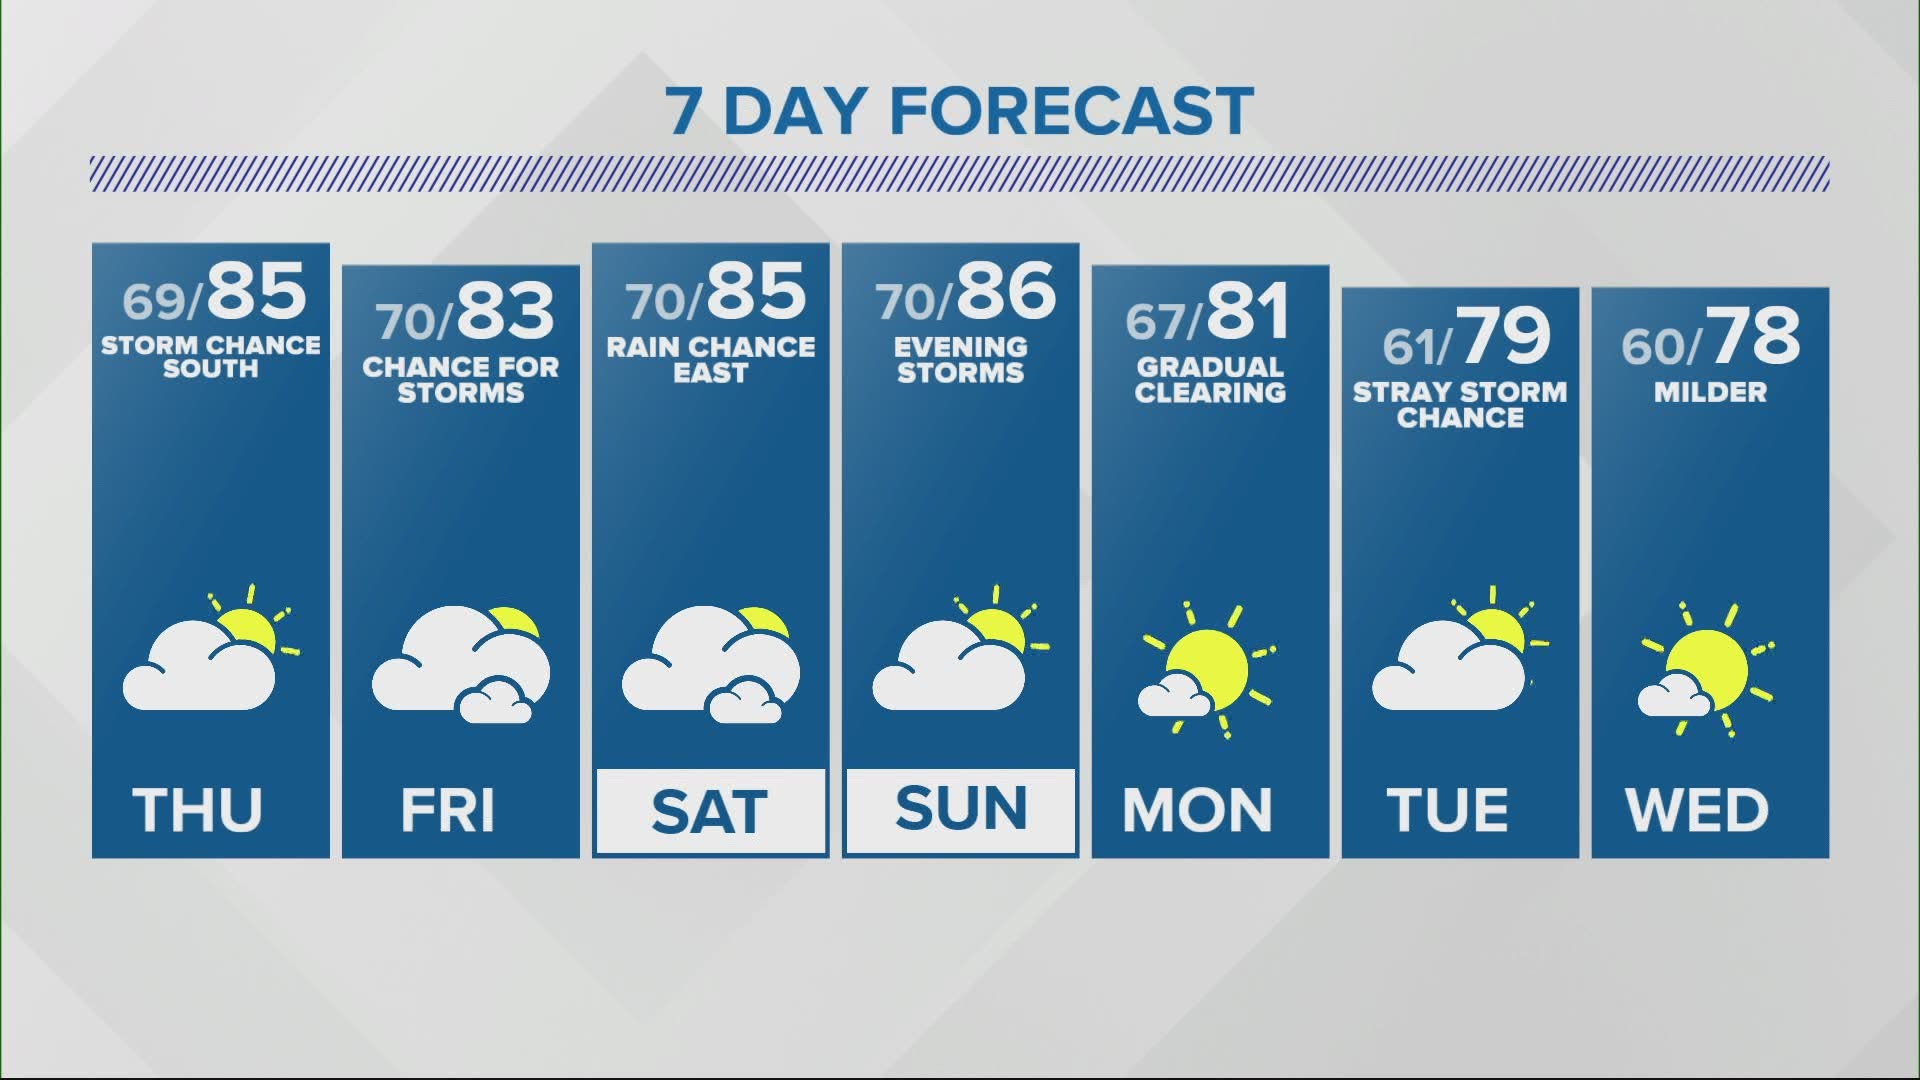 It will be hot and humid through the weekend.